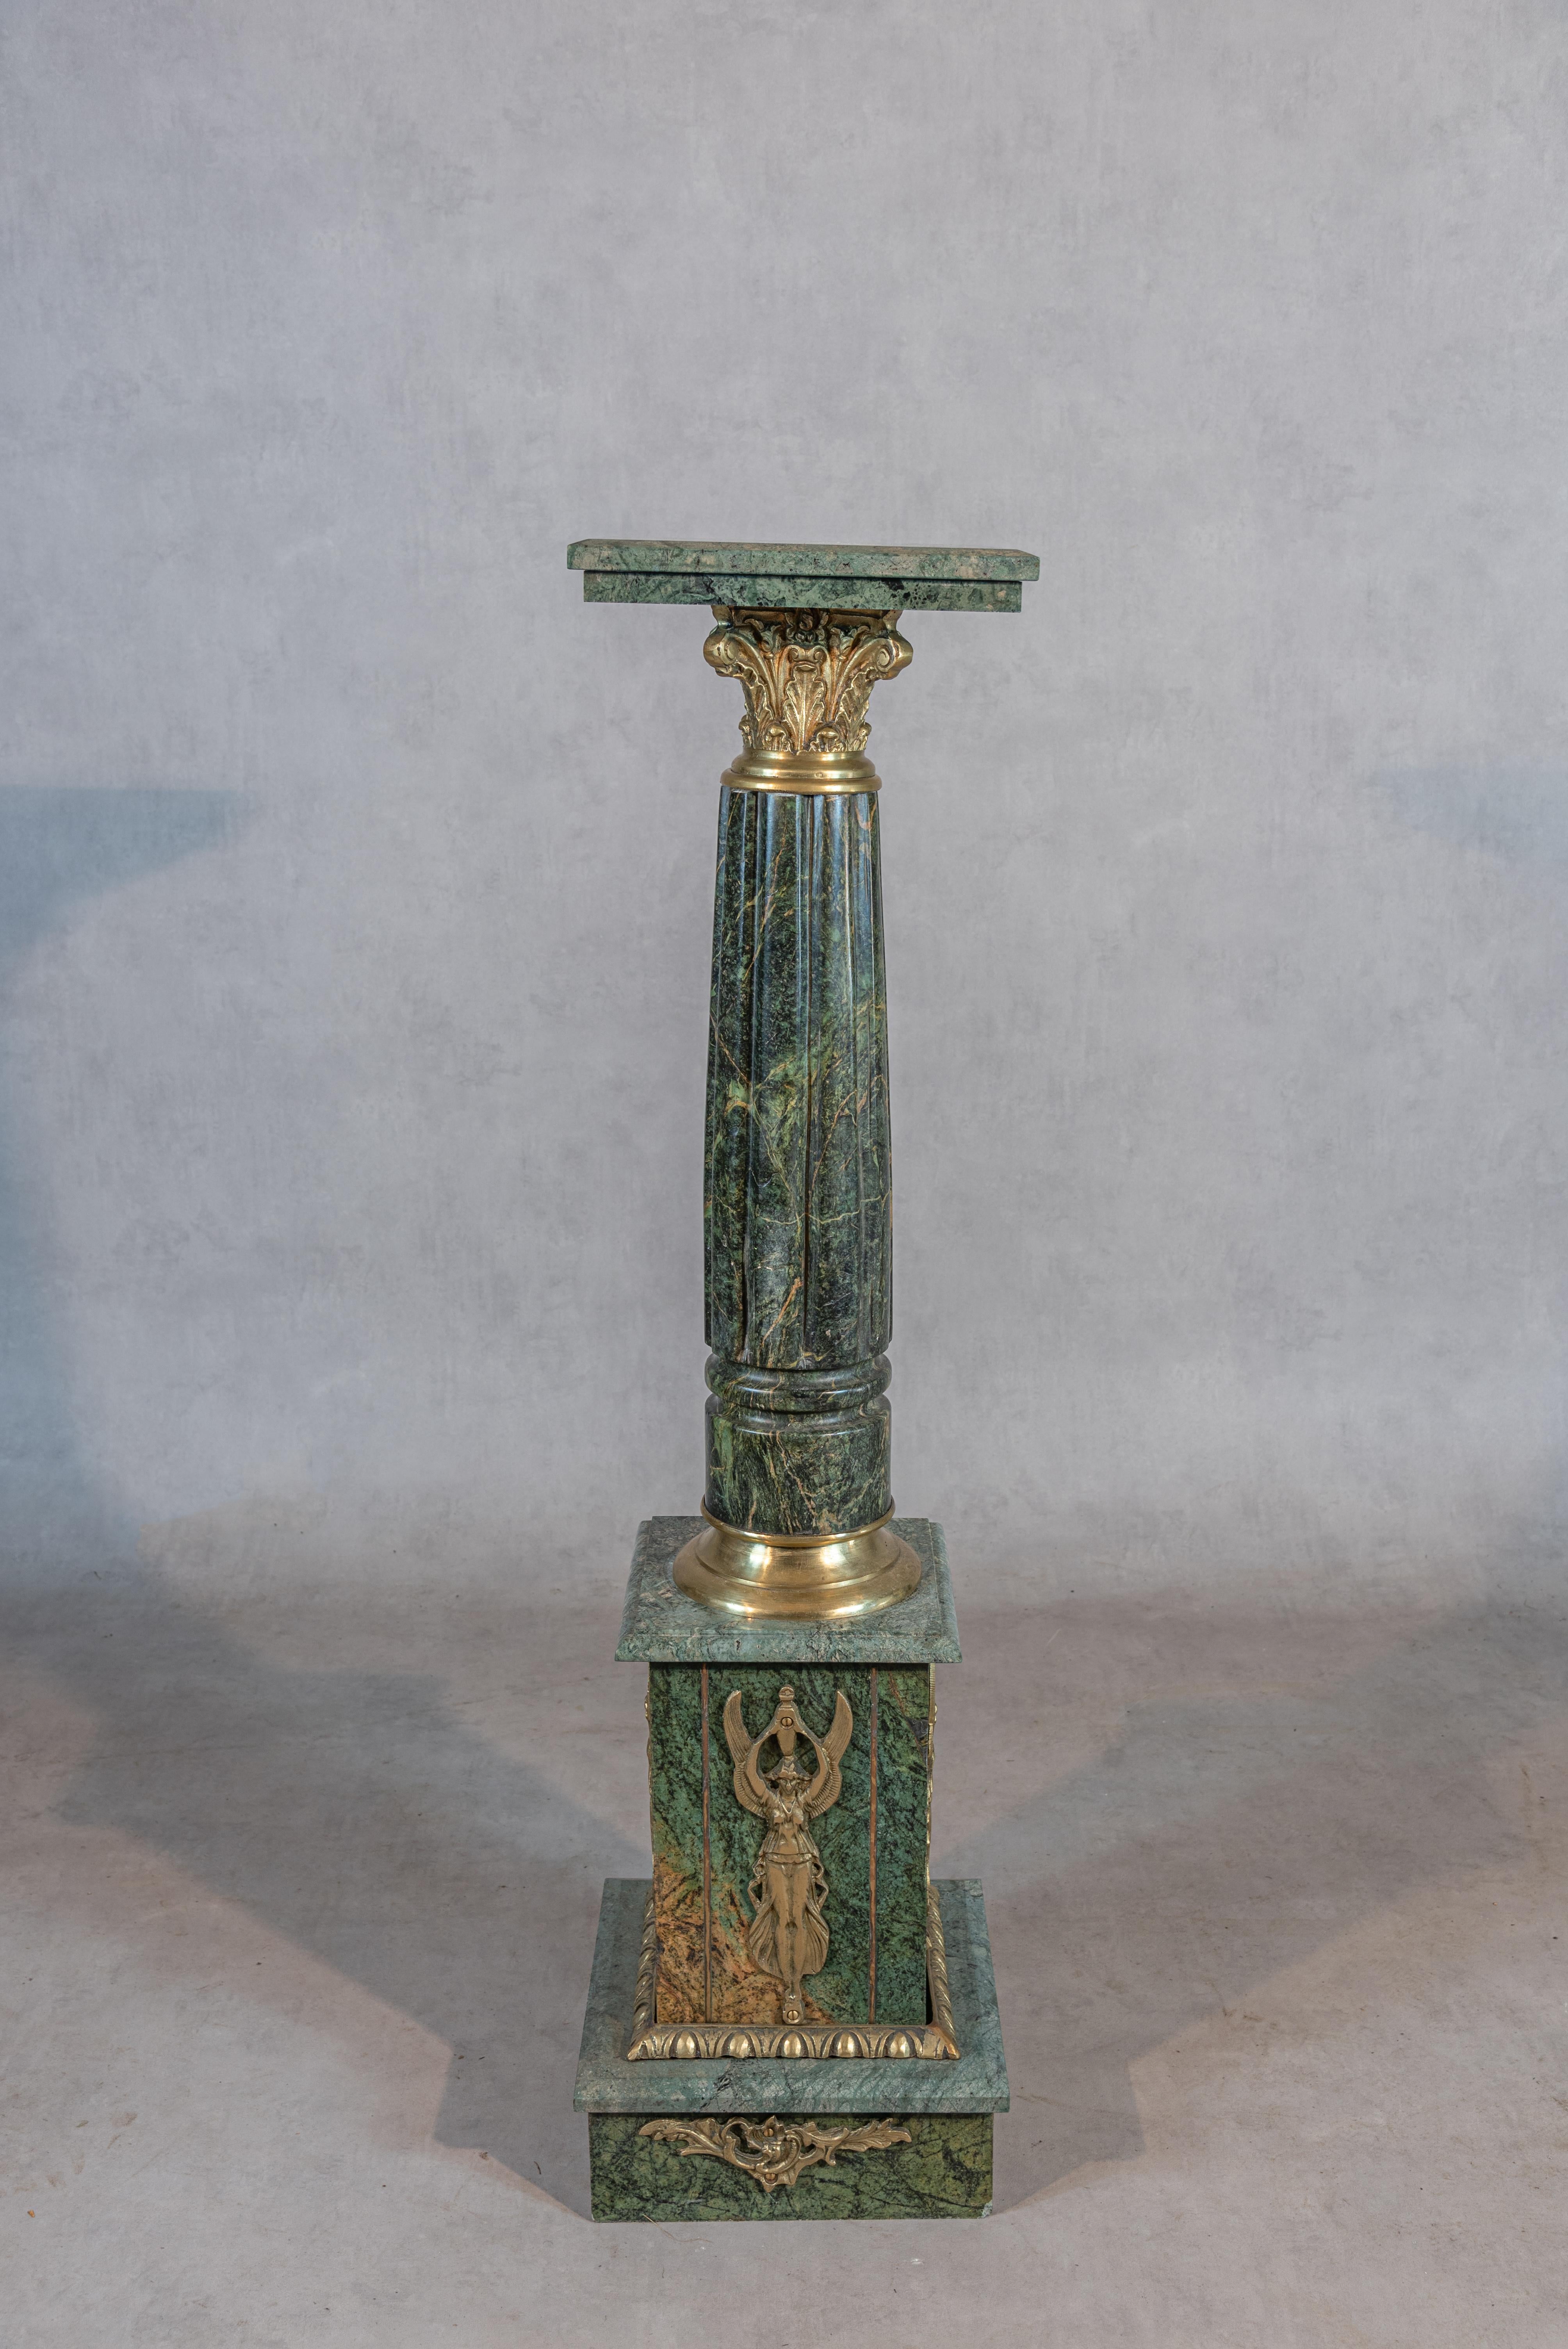 Experience the grandeur of the 19th Century Empire Style with this magnificent Green Marble and Brass Column. Crafted to perfection, this column exudes timeless elegance and regal charm, capturing the essence of the Empire aesthetic.

The rich